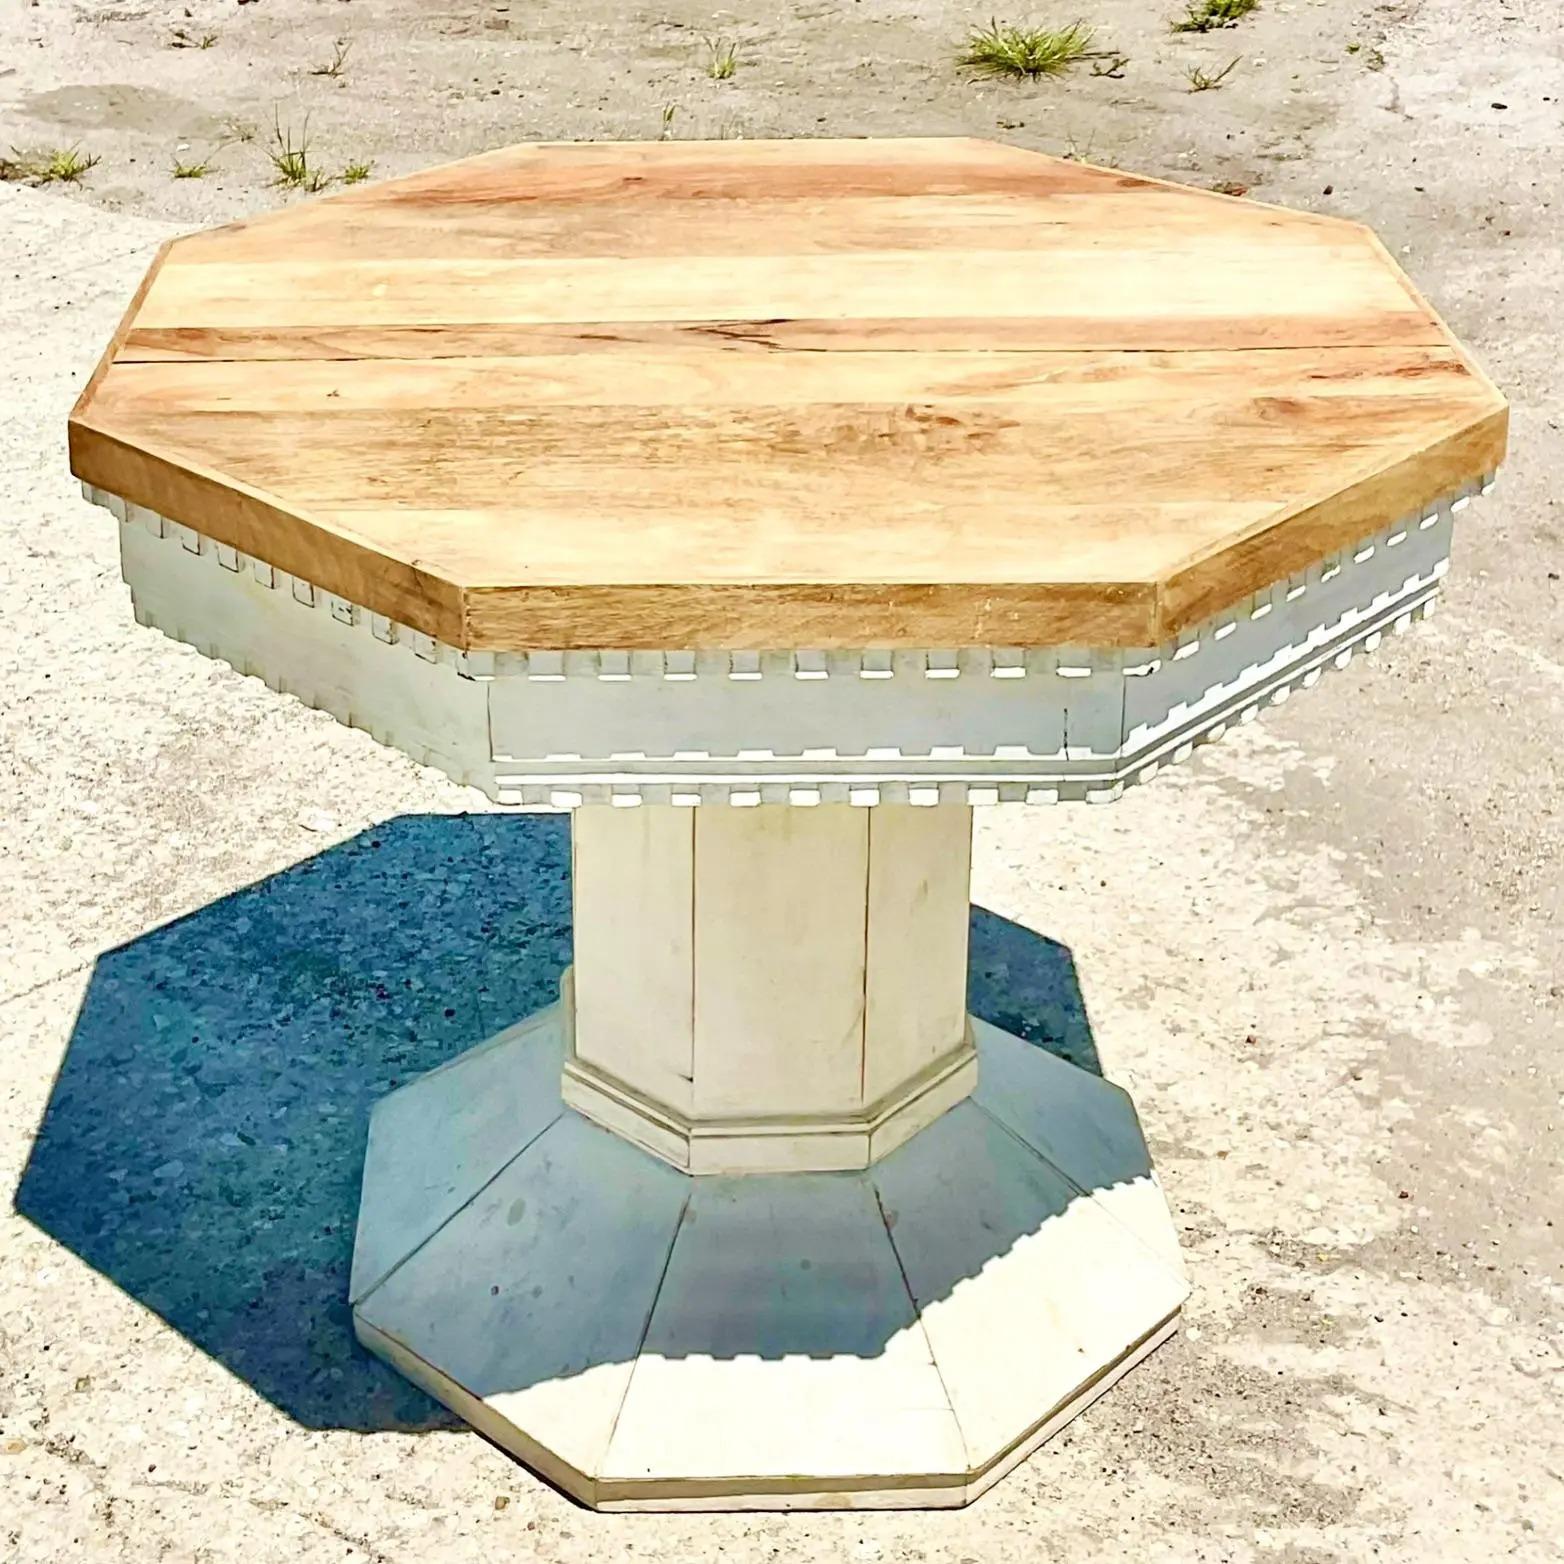 Fantastic vintage notched wood entry table. Beautiful reclaimed wood in two finishes, natural and white. Perfect for your entry or small dining area. Even a chic side table. You decide! Acquired from a Palm Beach estate.

The table is in great